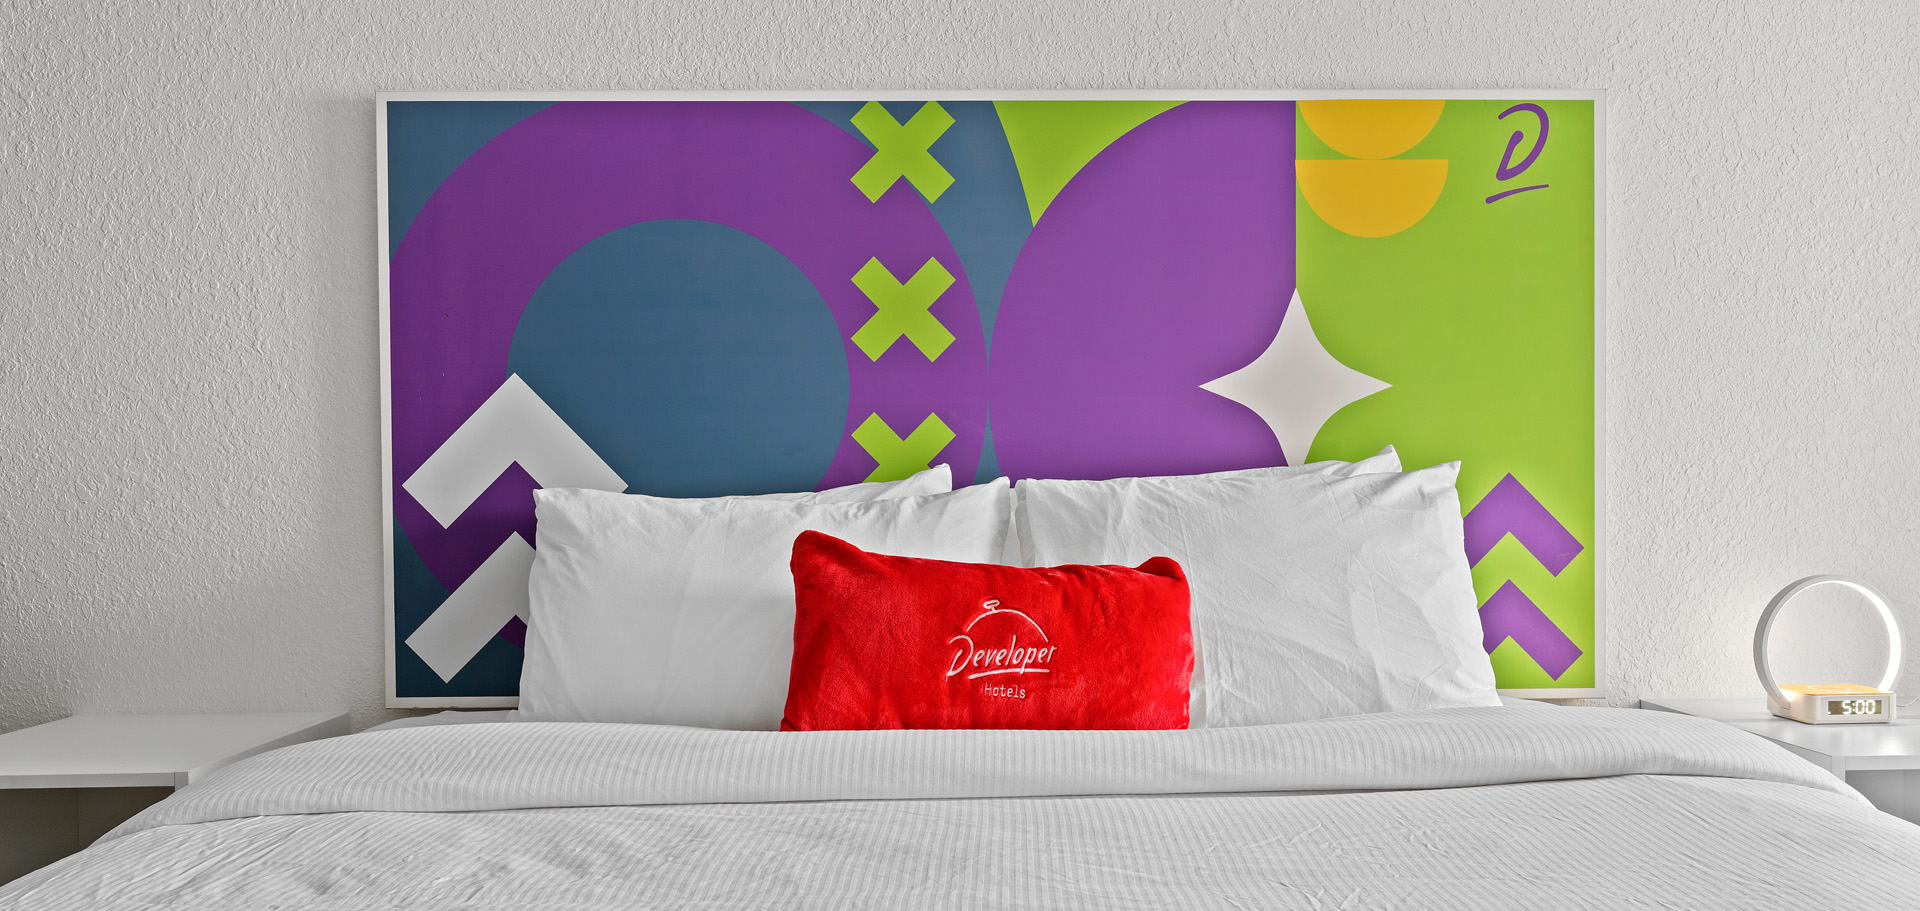 Rendering of king bed with white sheets, colorful wall art